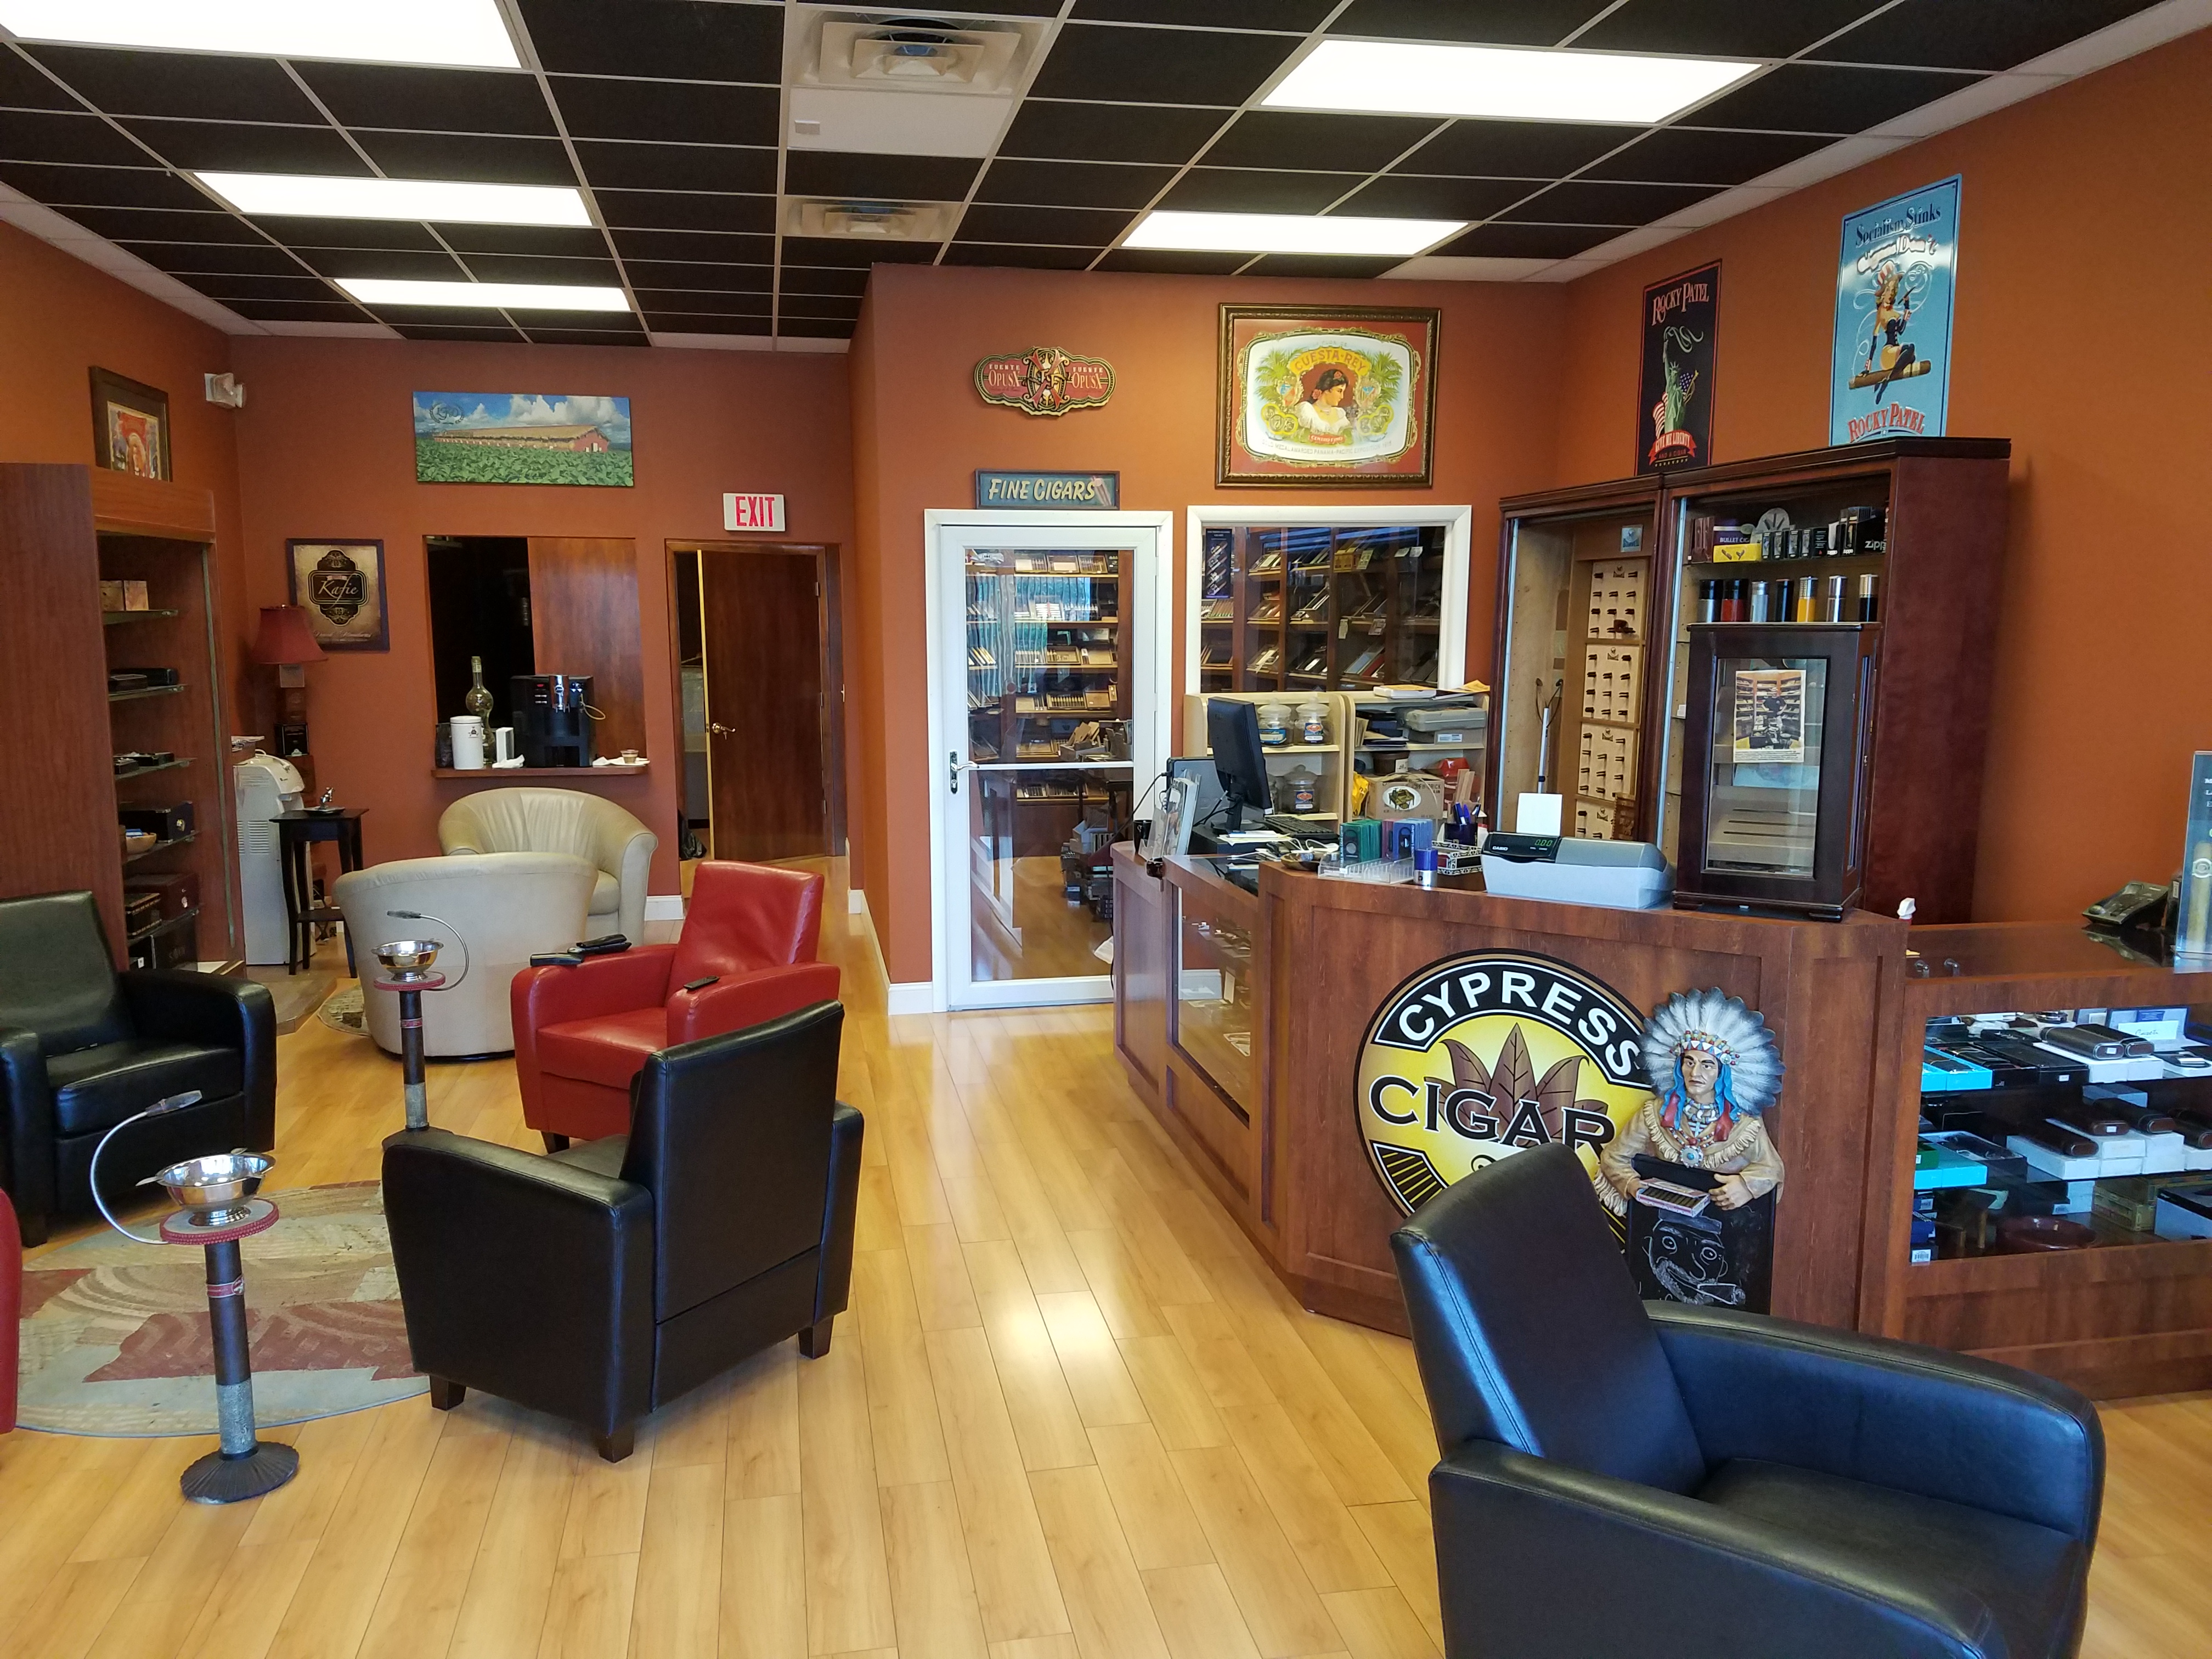 Cypress Cigars Your New Favorite Cigar Lounge